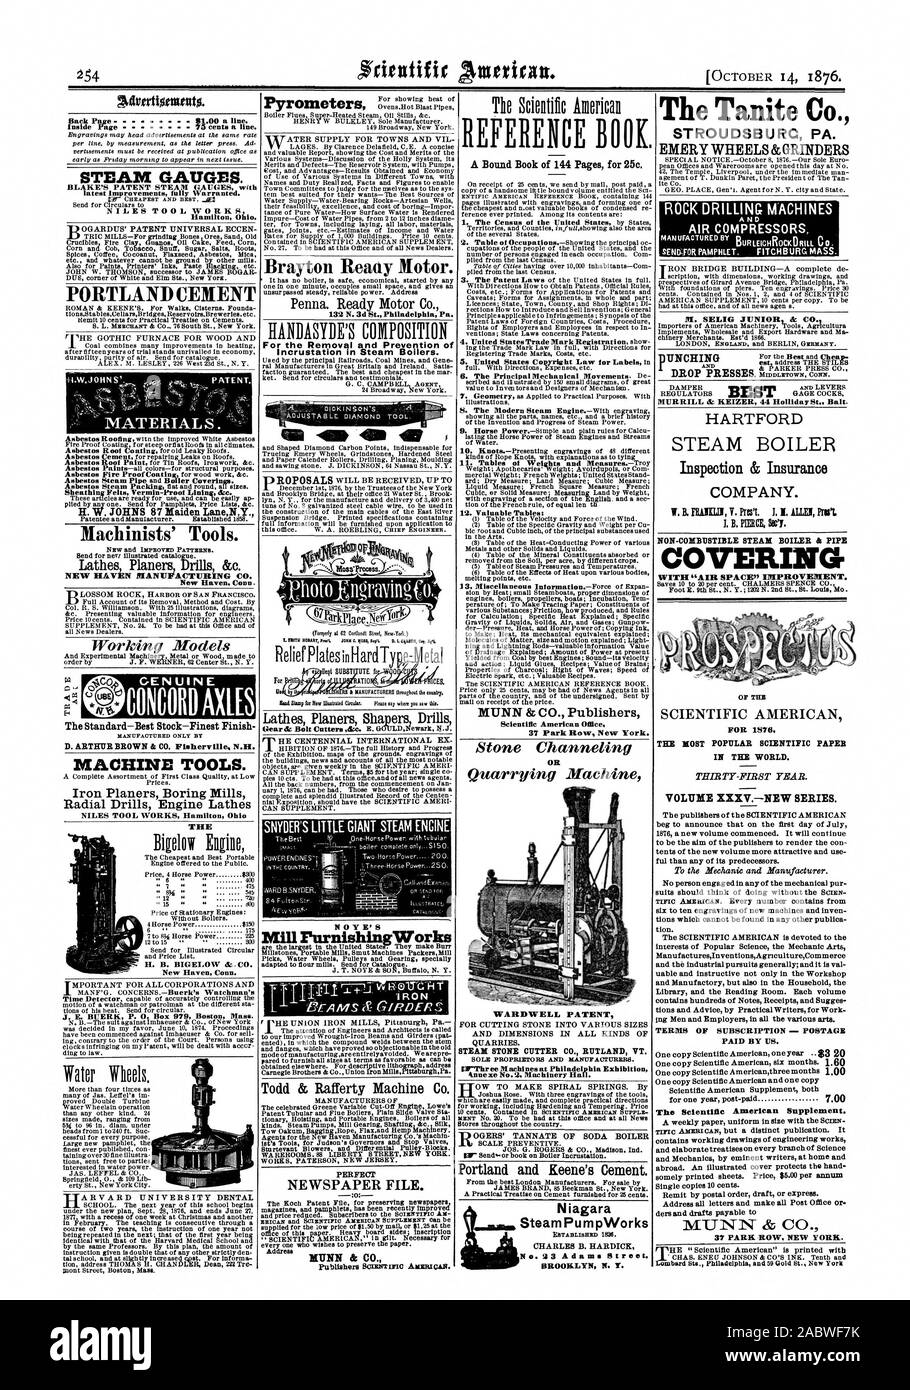 The Tanite Co. ST RO U DSB U RC PA. EMERY WHEELS &GRINDERS MURRILL & KEIZER 44 Holliday St Bait. B. HERM Seq. COVERING SCIENTIFIC AMERICAN FOIL 1576 THE MOST POPULAR SCIENTIFIC PAPER IN THE WORLD. VOLUME XXXV.-NEW SERIES. TERMS OF SUBSCRIPTION - POSTAGE PAID BY US. The Scientific American Supplement. 37 PARK ROW NEW YORK. CONCORD AXLES ROCK DRILLING MACHINES NO Y E' S Mill Furnishing Works SNYDER'S LITTLE GIANT STEAM ENGINE Brayton Ready Motor. For the Removal and Prevention of Incrustation in Steam Boilers. STEAM GAUGES. PORTLAND CEMENT Sheathing Felts Vermin-Proof Lining &e. Machinists Stock Photo